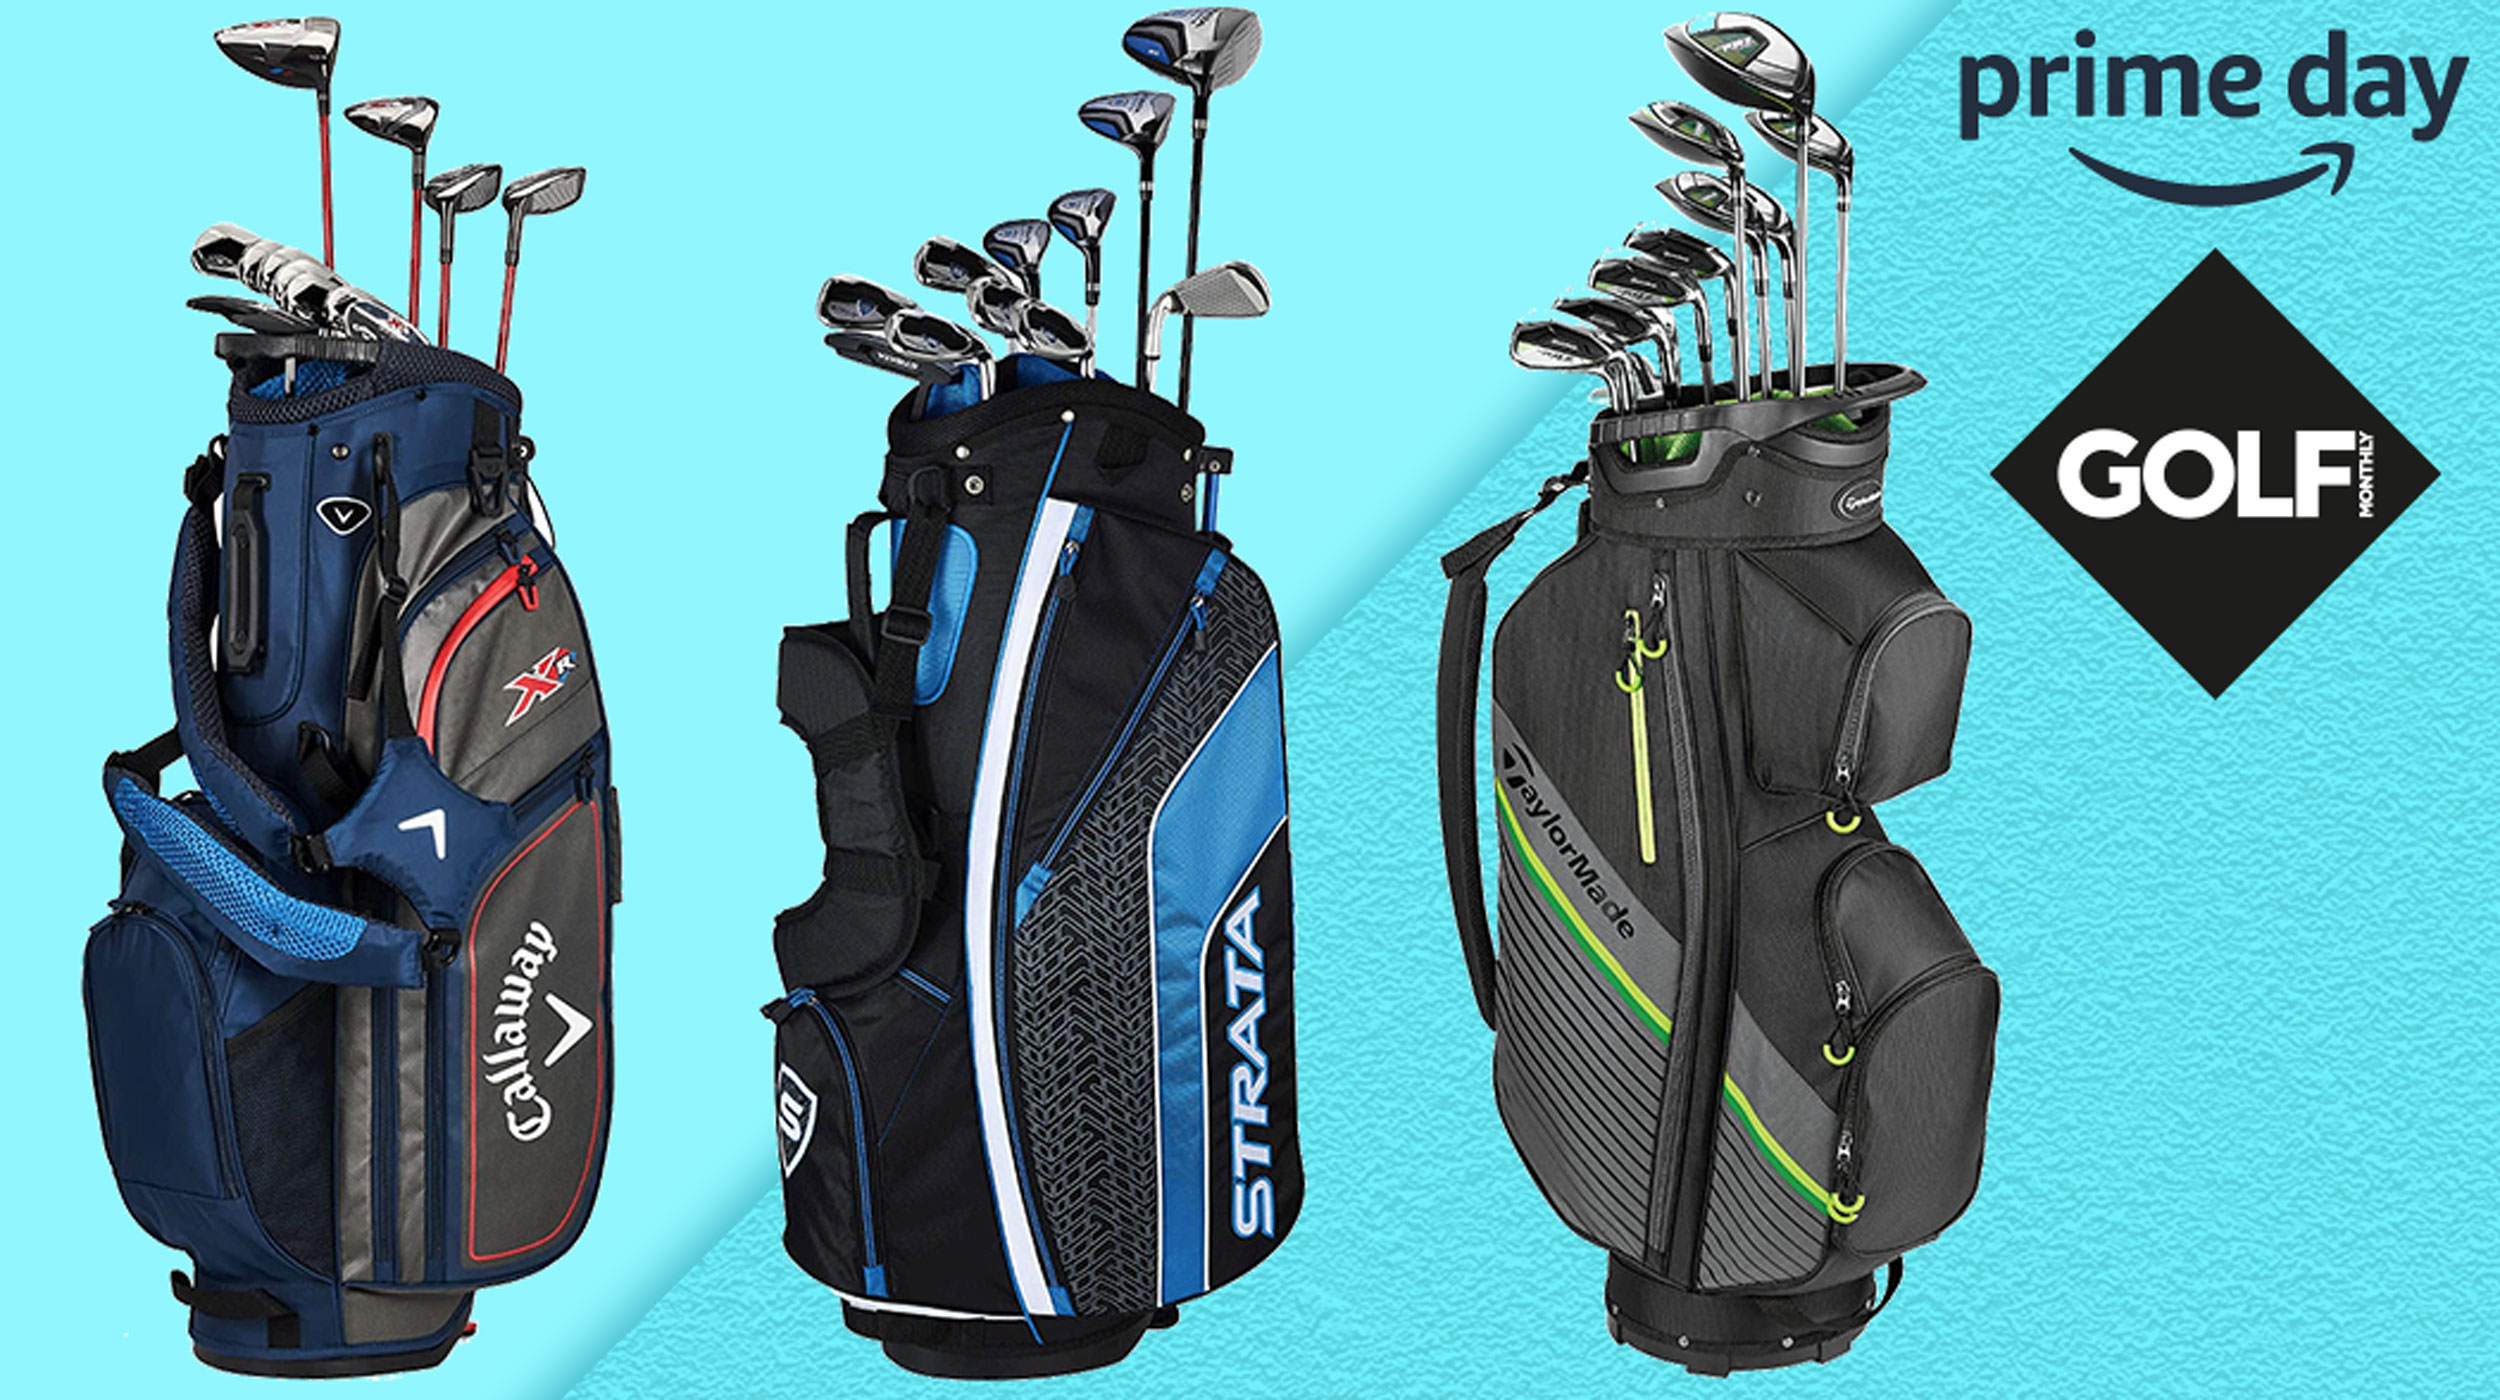 Save big on Callaway golf clubs for beginners this Prime Day